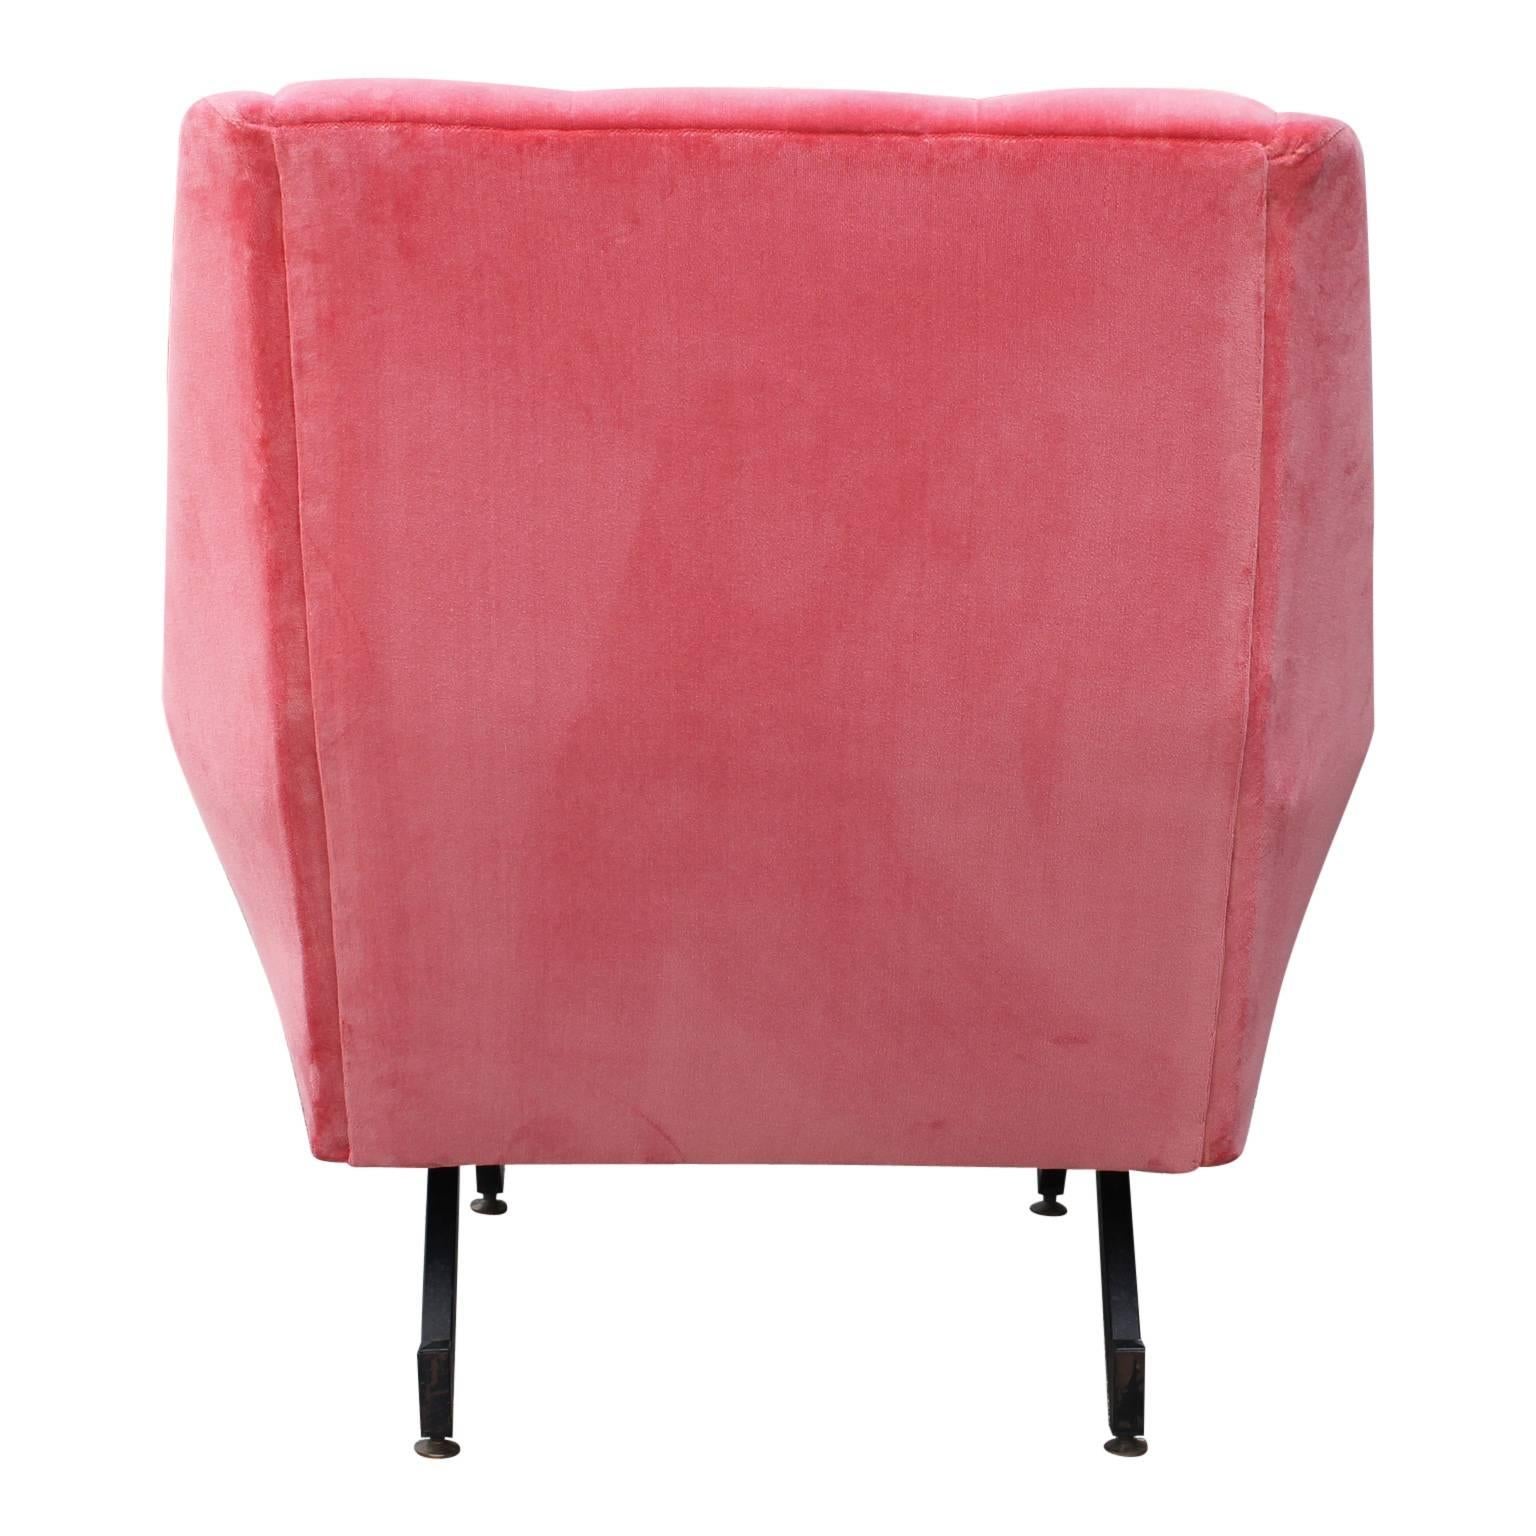 Pair of Italian Modern Tufted Lounge Chairs in Coral Pink Velvet Adjustable Legs 1